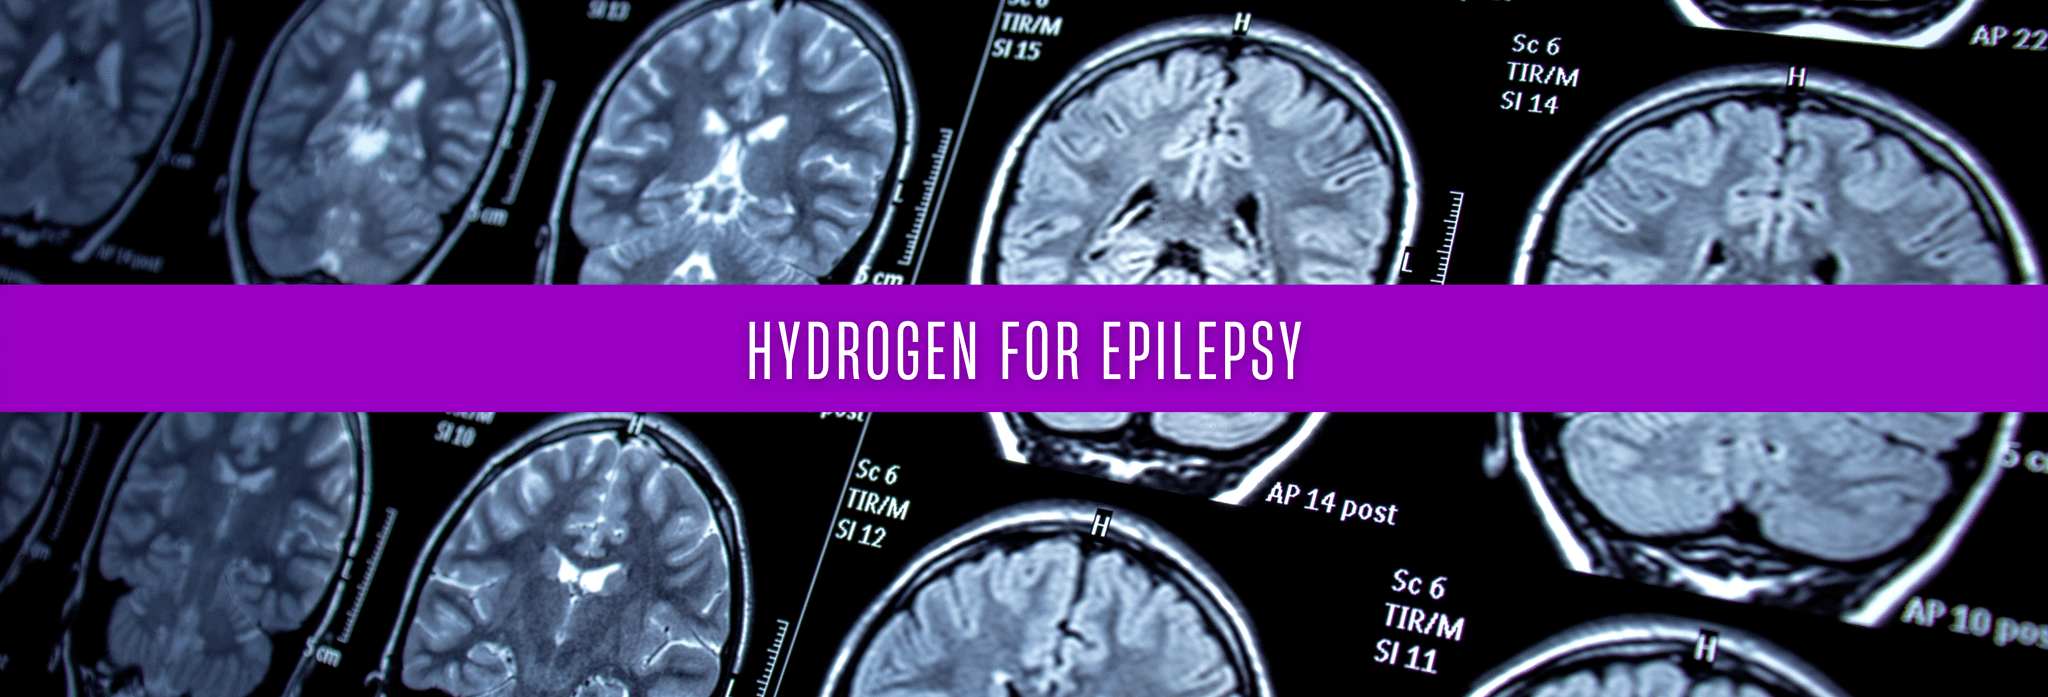 Hydrogen's Health potential for Epilepsy